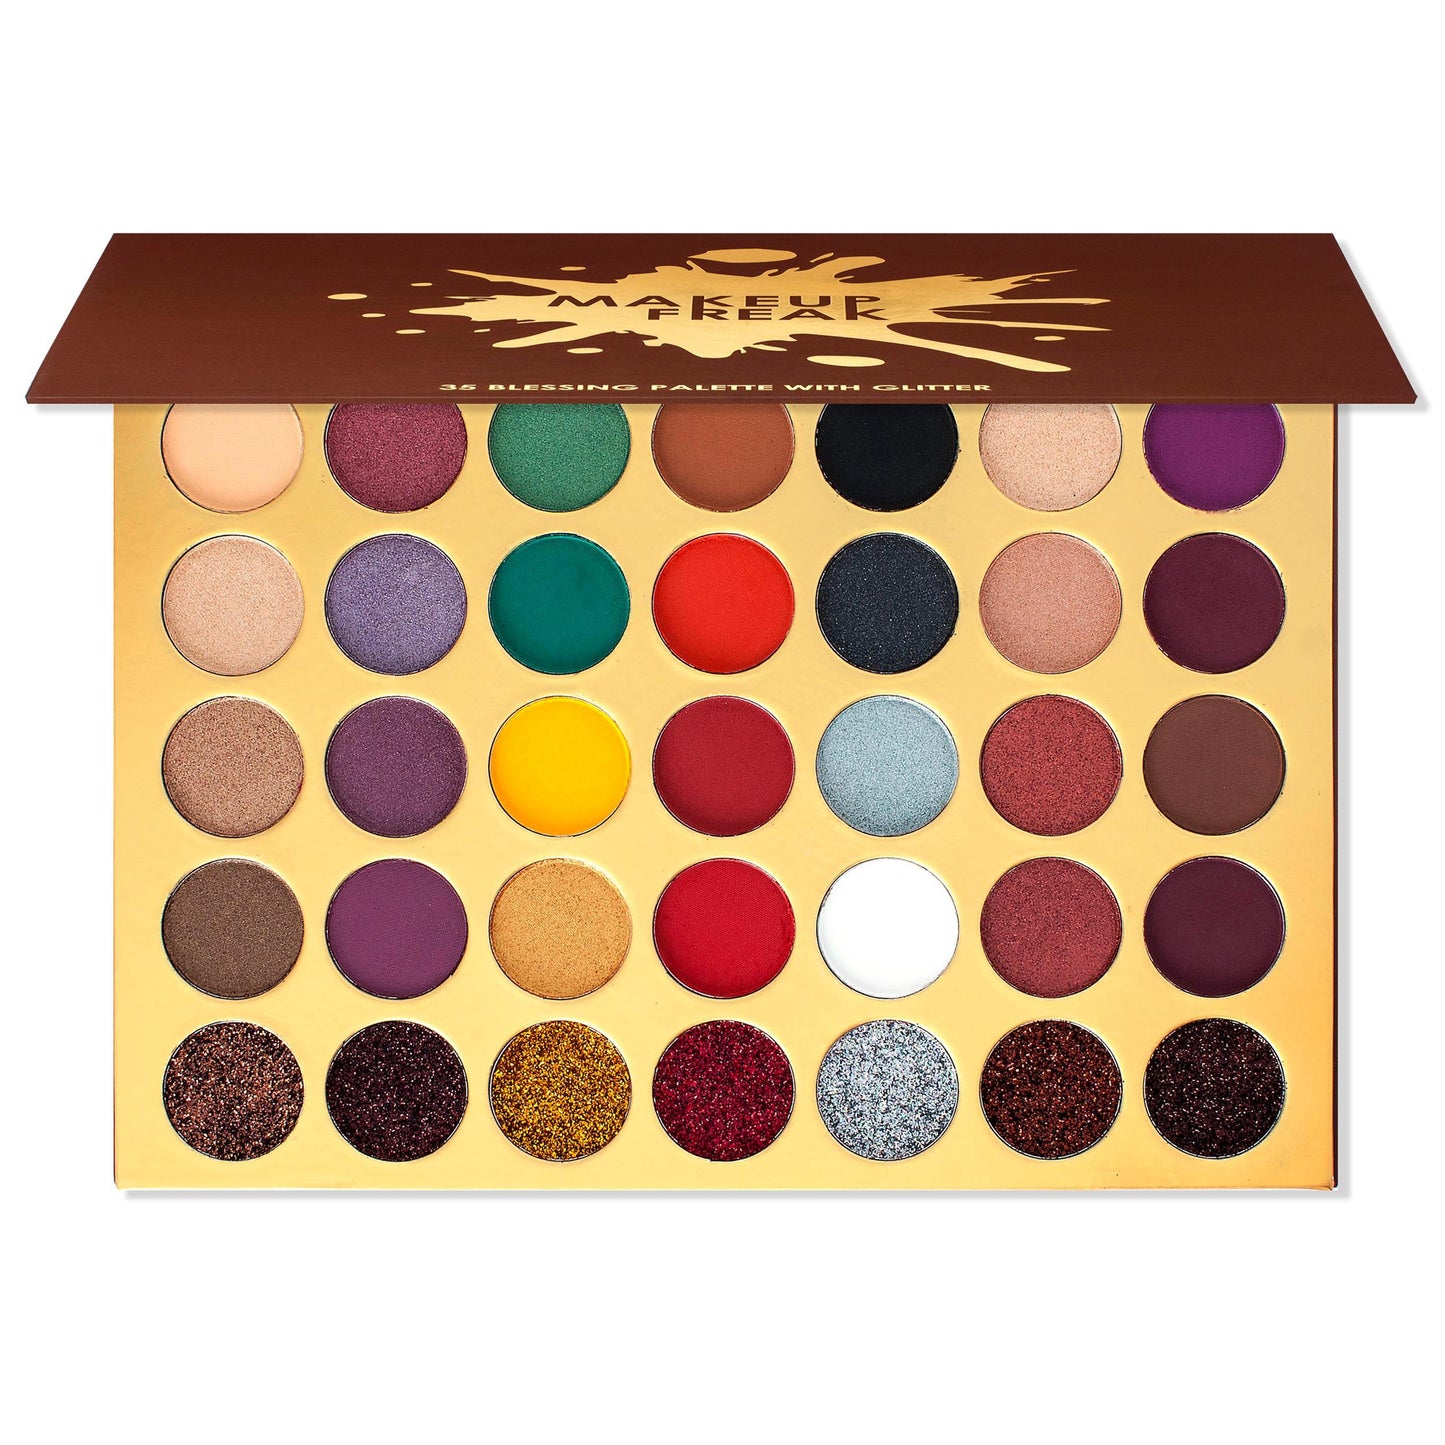 Makeup Freak Blessing 35 Color Pigmented Eyeshadow Palette With Glitter Autumn - LOLA LUXE